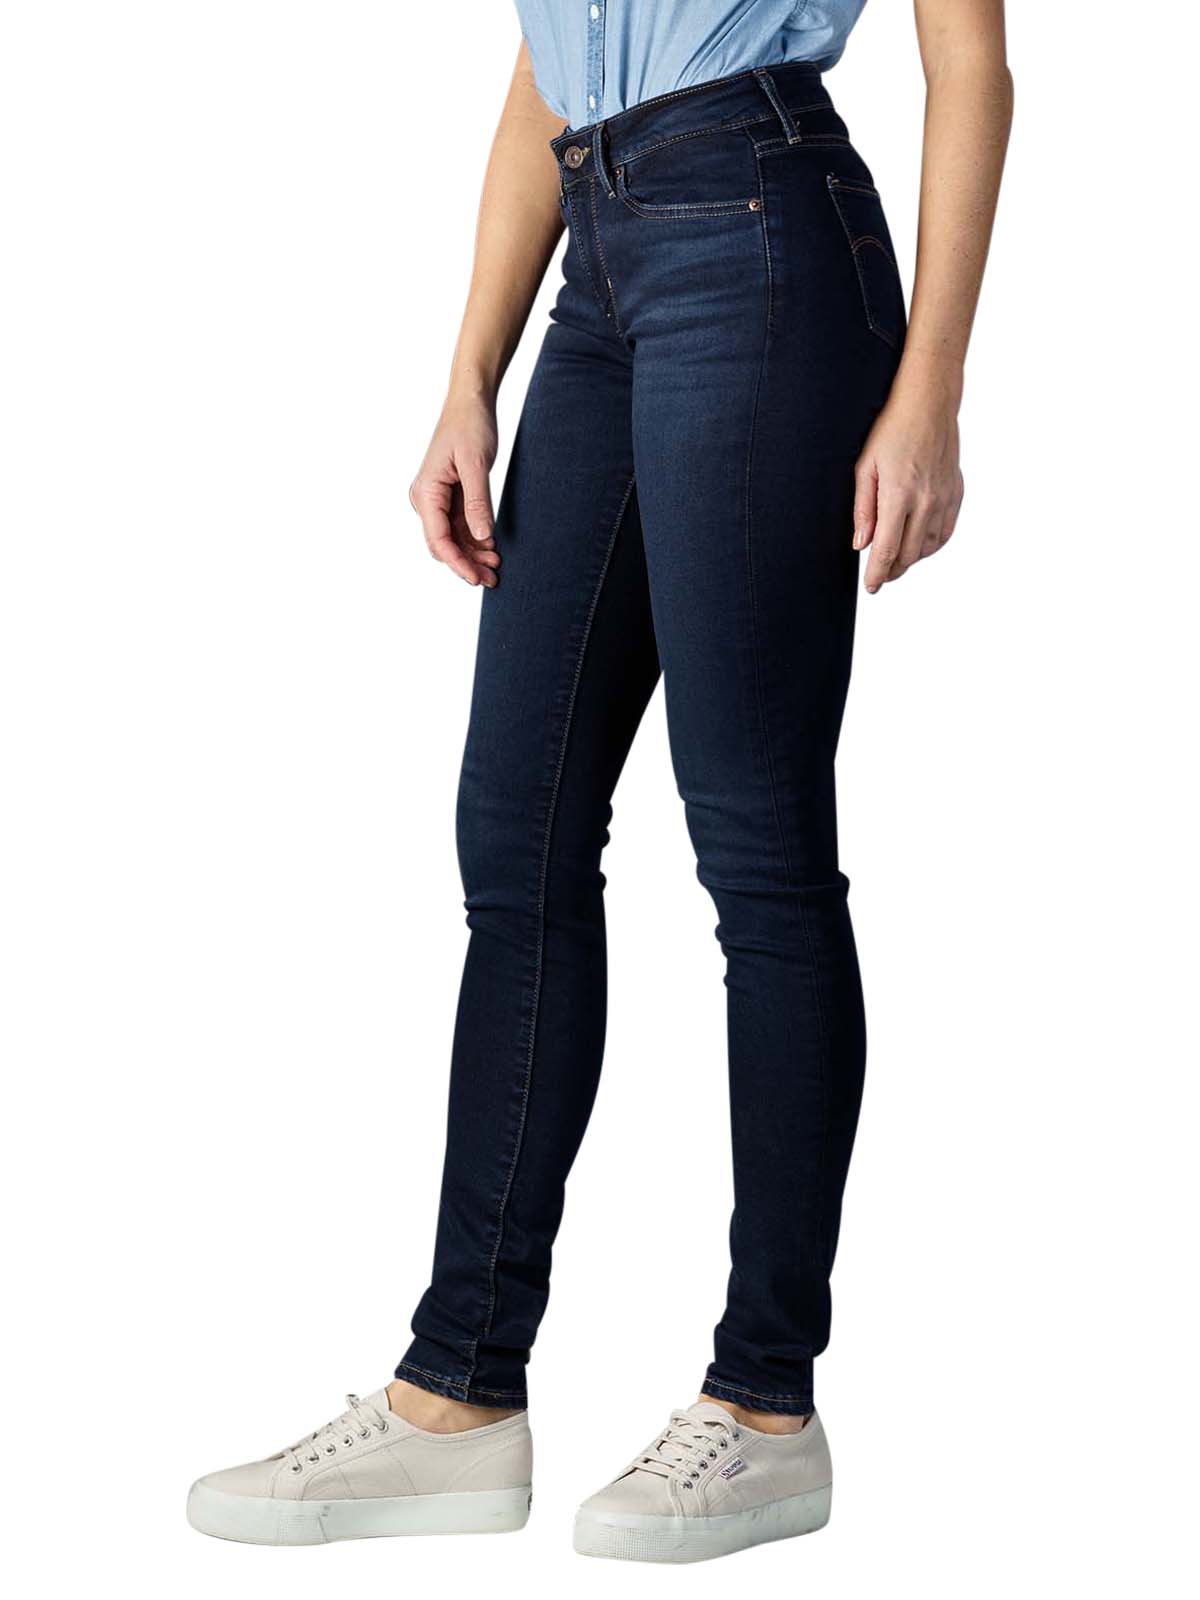 Mustang Gina Skinny 2B Damen Jeans to W25 W32  / STONE WASHED